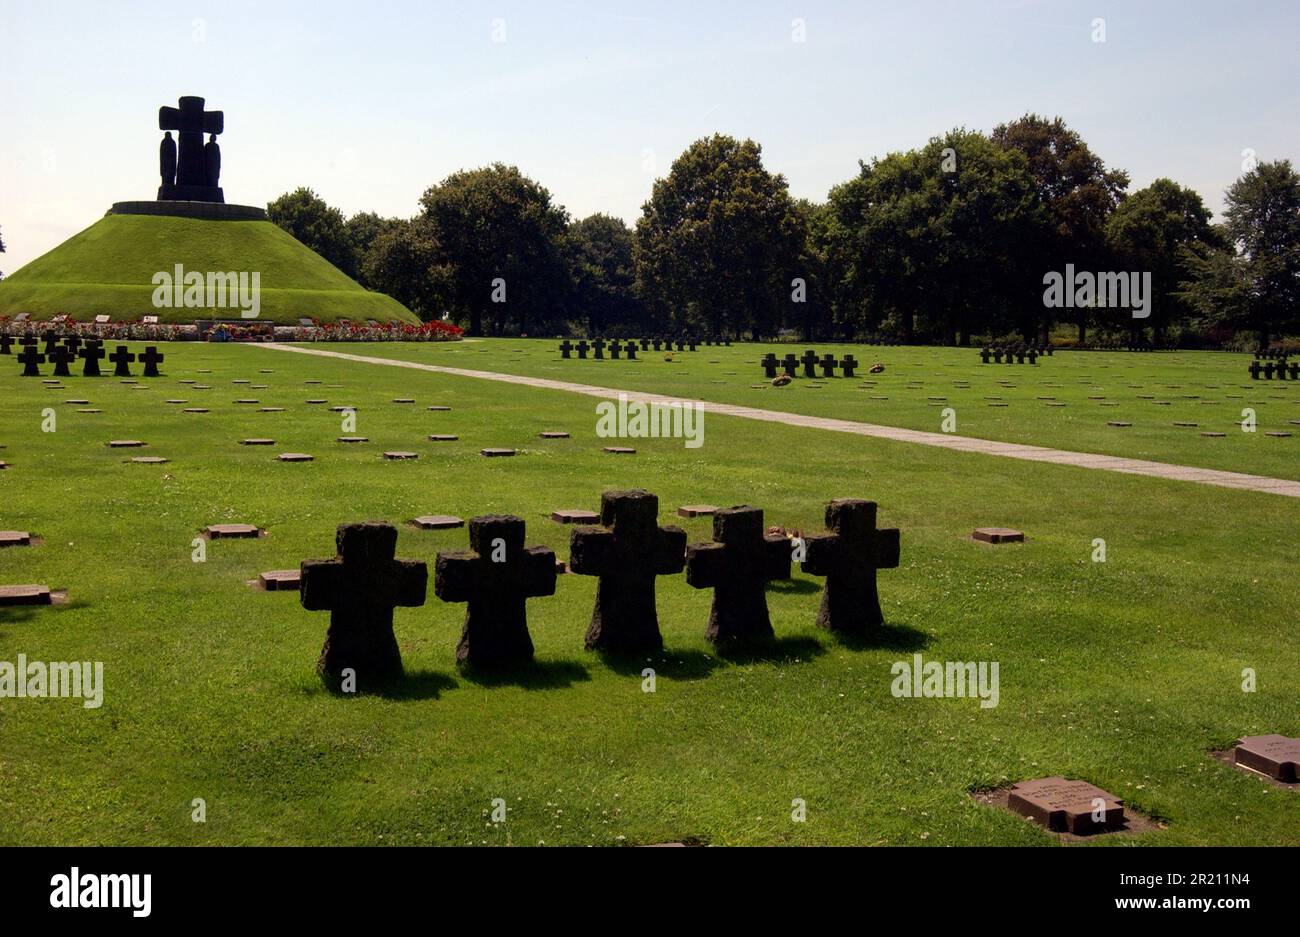 Photograph taken at a World War Two cemetery near Cambe, Calvados, Normandy, France. The cemetery is the largest German war cemetery in Normandy and contains over 21,200 German military personnel. Stock Photo